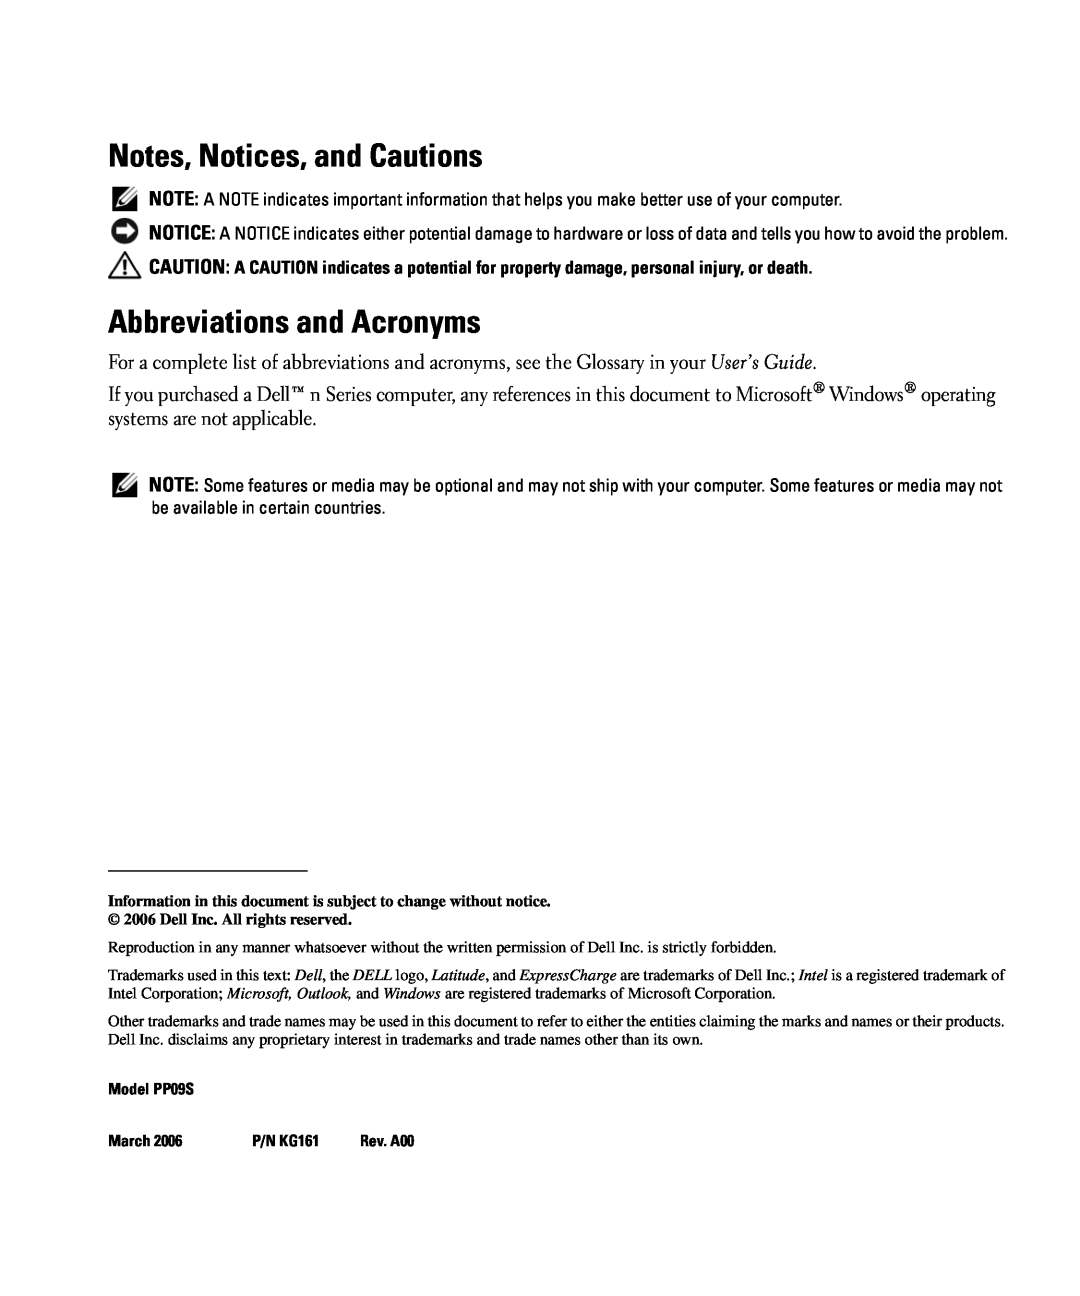 Dell D420 manual Notes, Notices, and Cautions, Abbreviations and Acronyms, Model PP09S, March, P/N KG161 